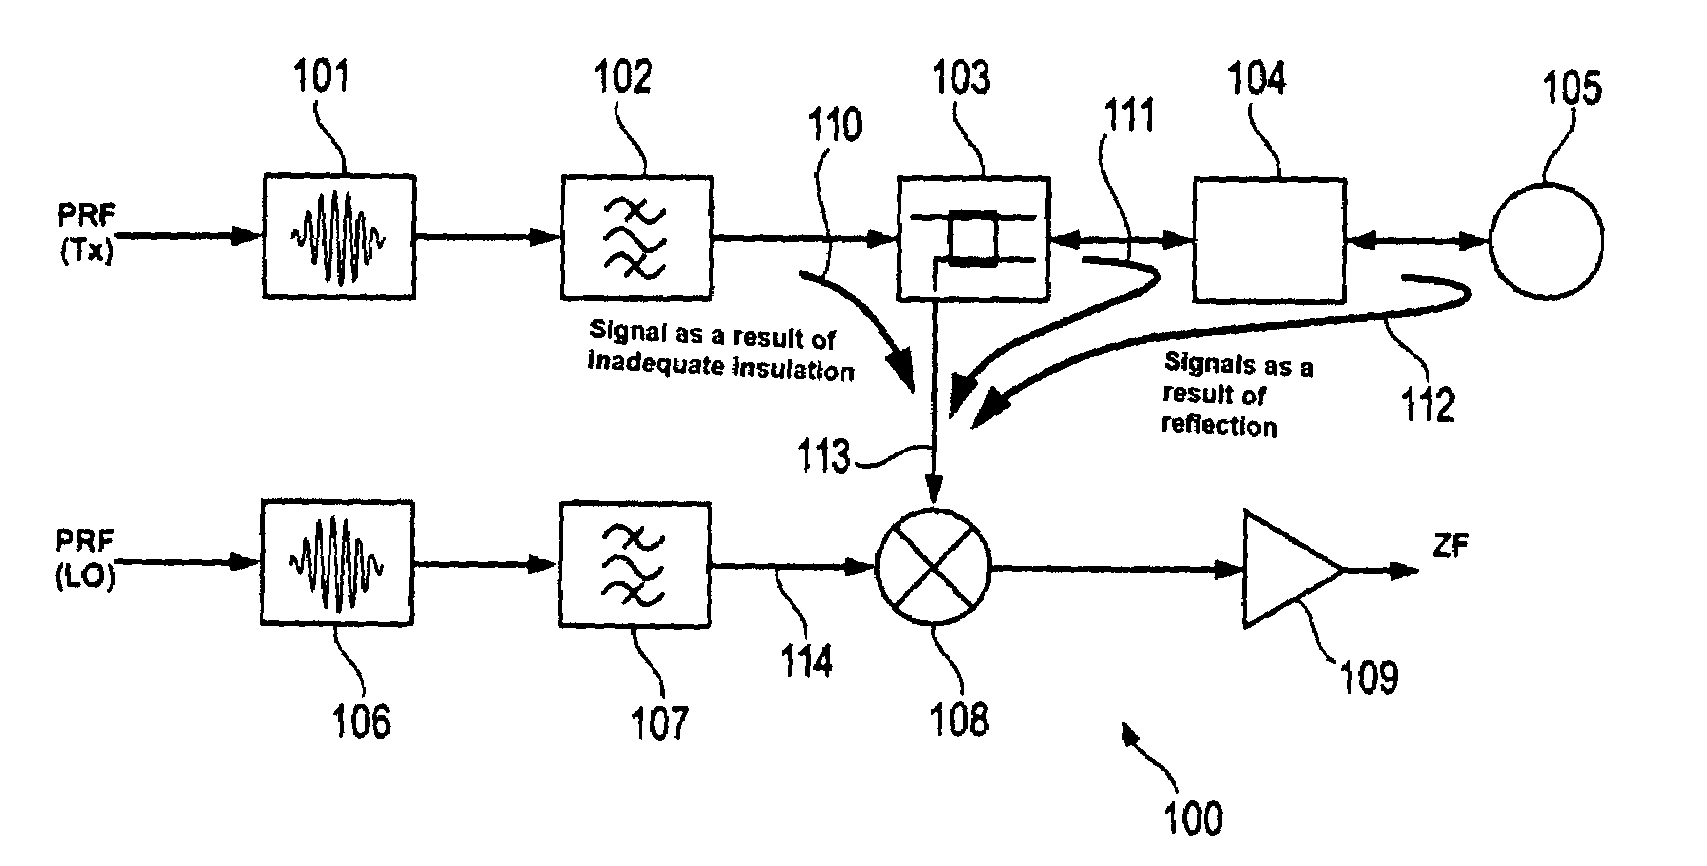 Independent reference pulse generation